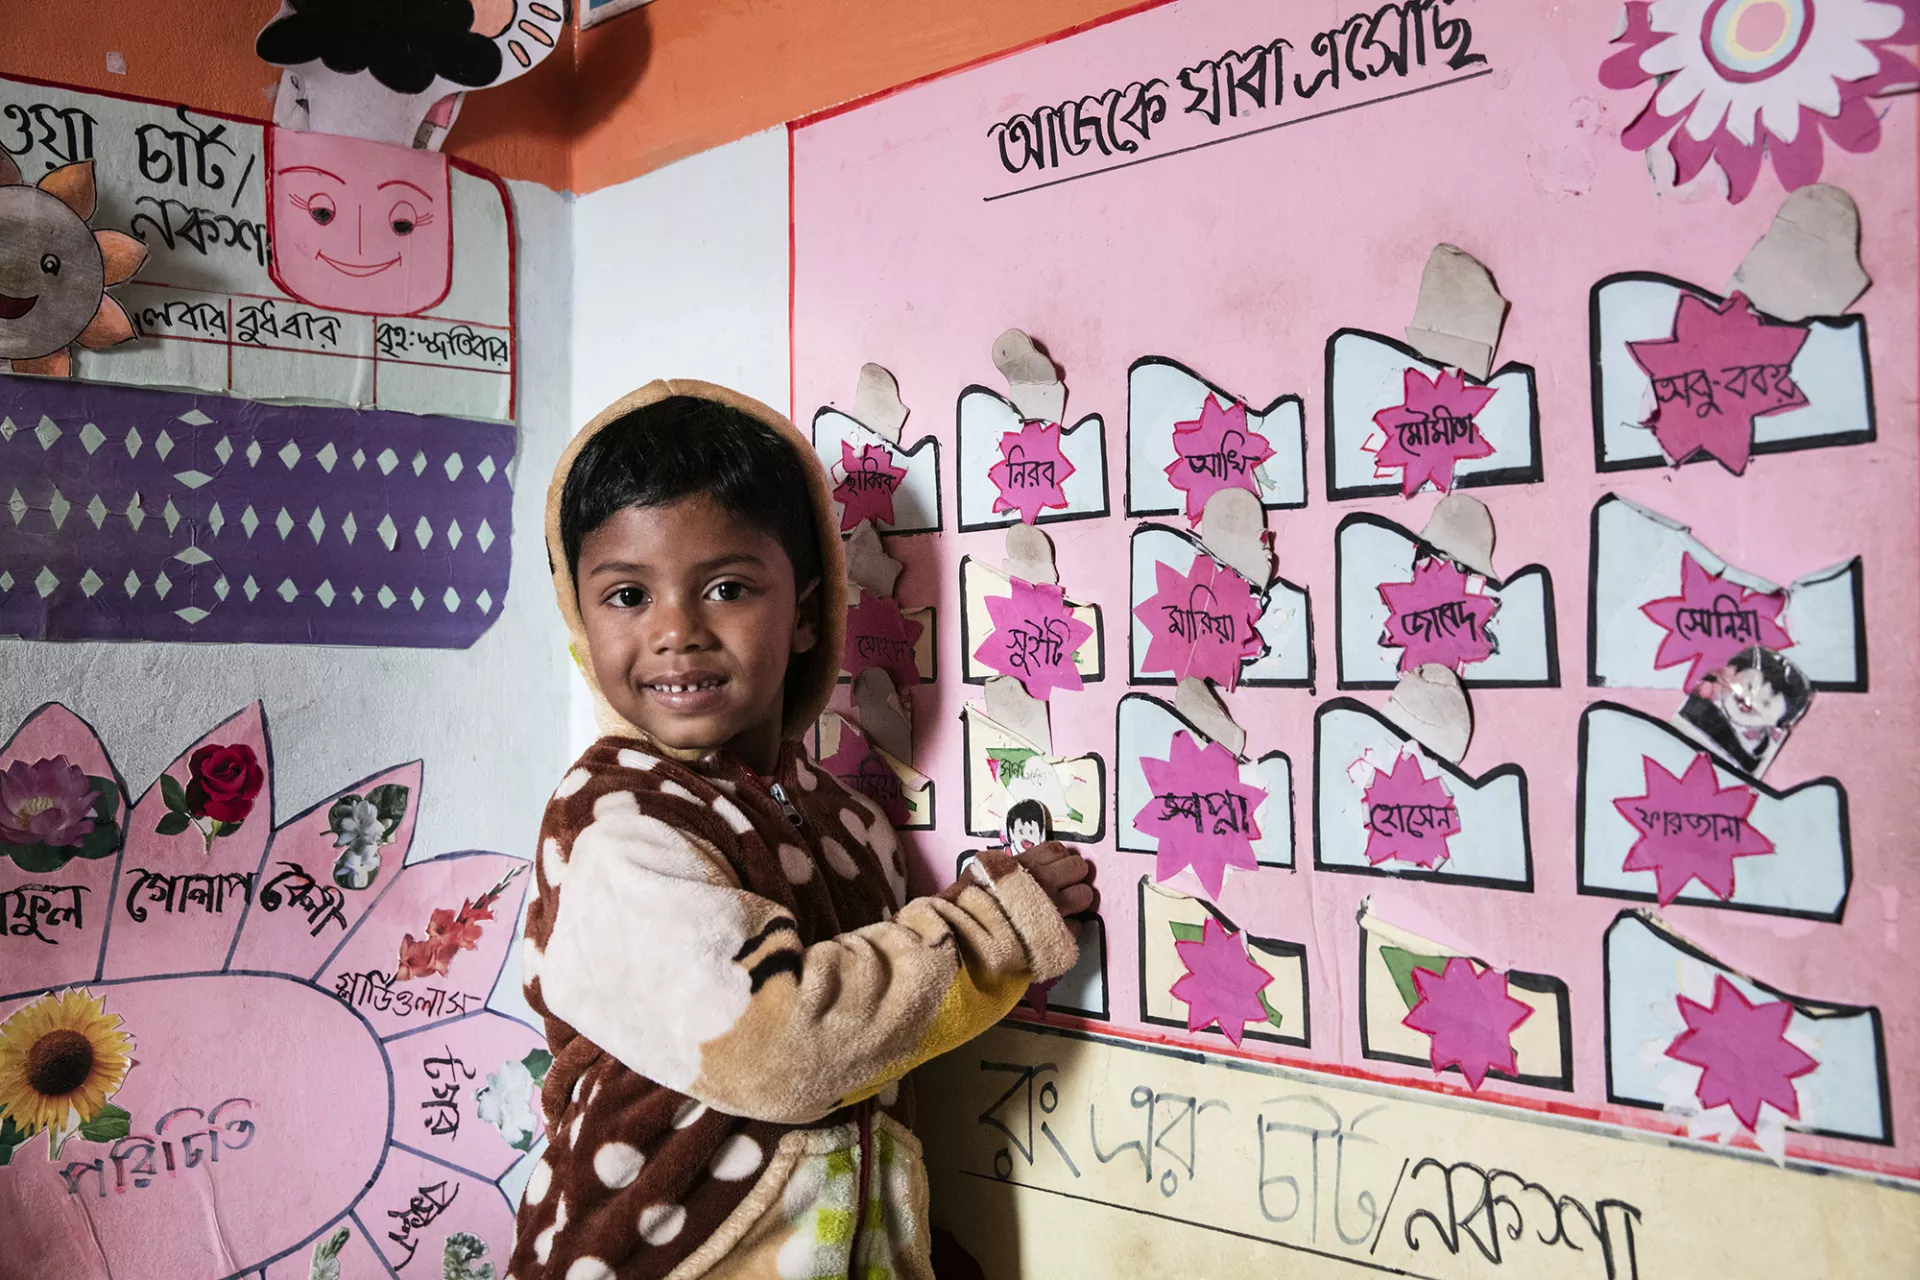 A young child marking off his presence on the color chart at a day care in Bangladesh